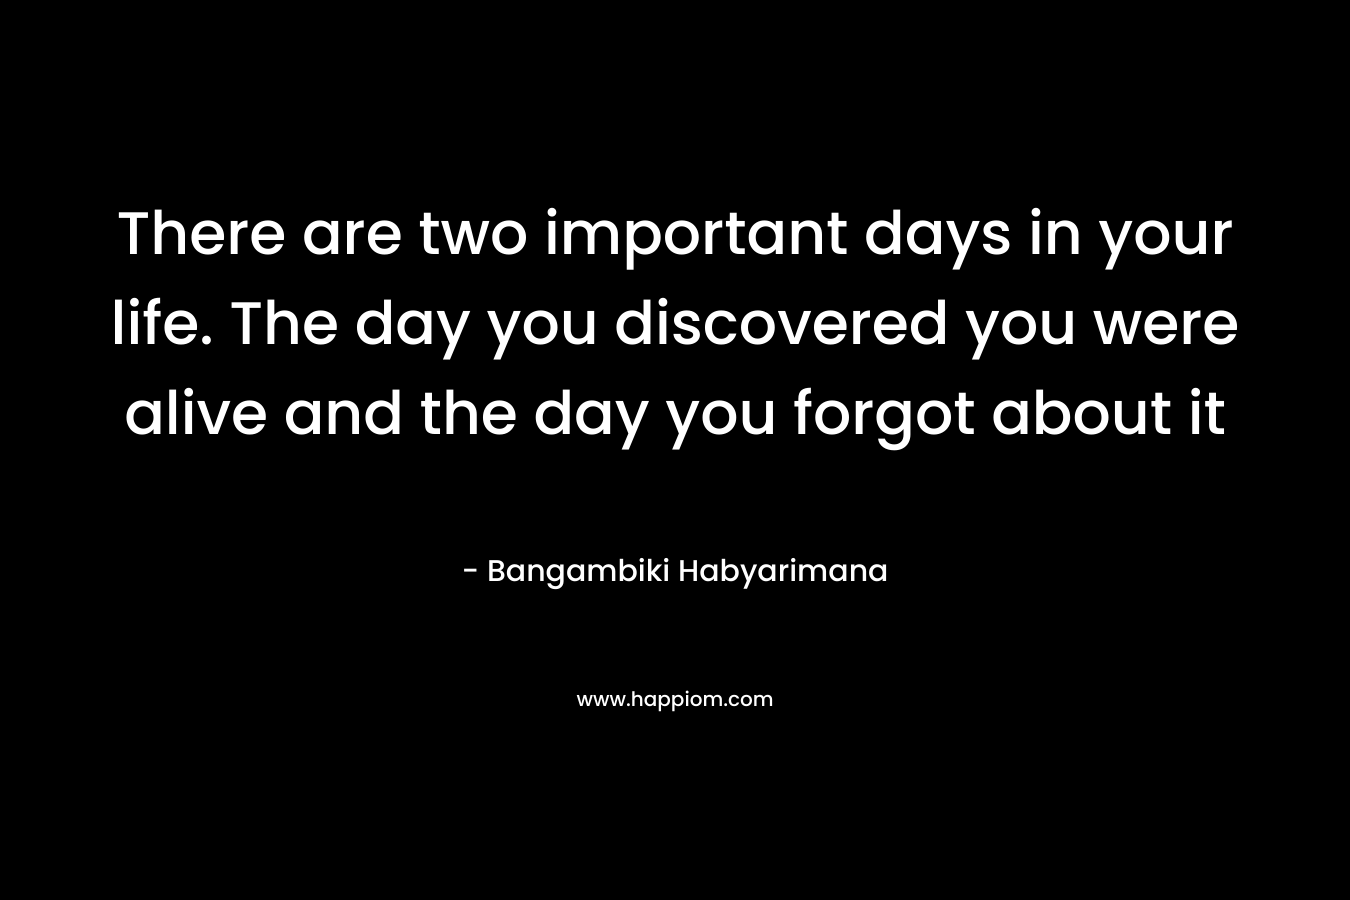 There are two important days in your life. The day you discovered you were alive and the day you forgot about it